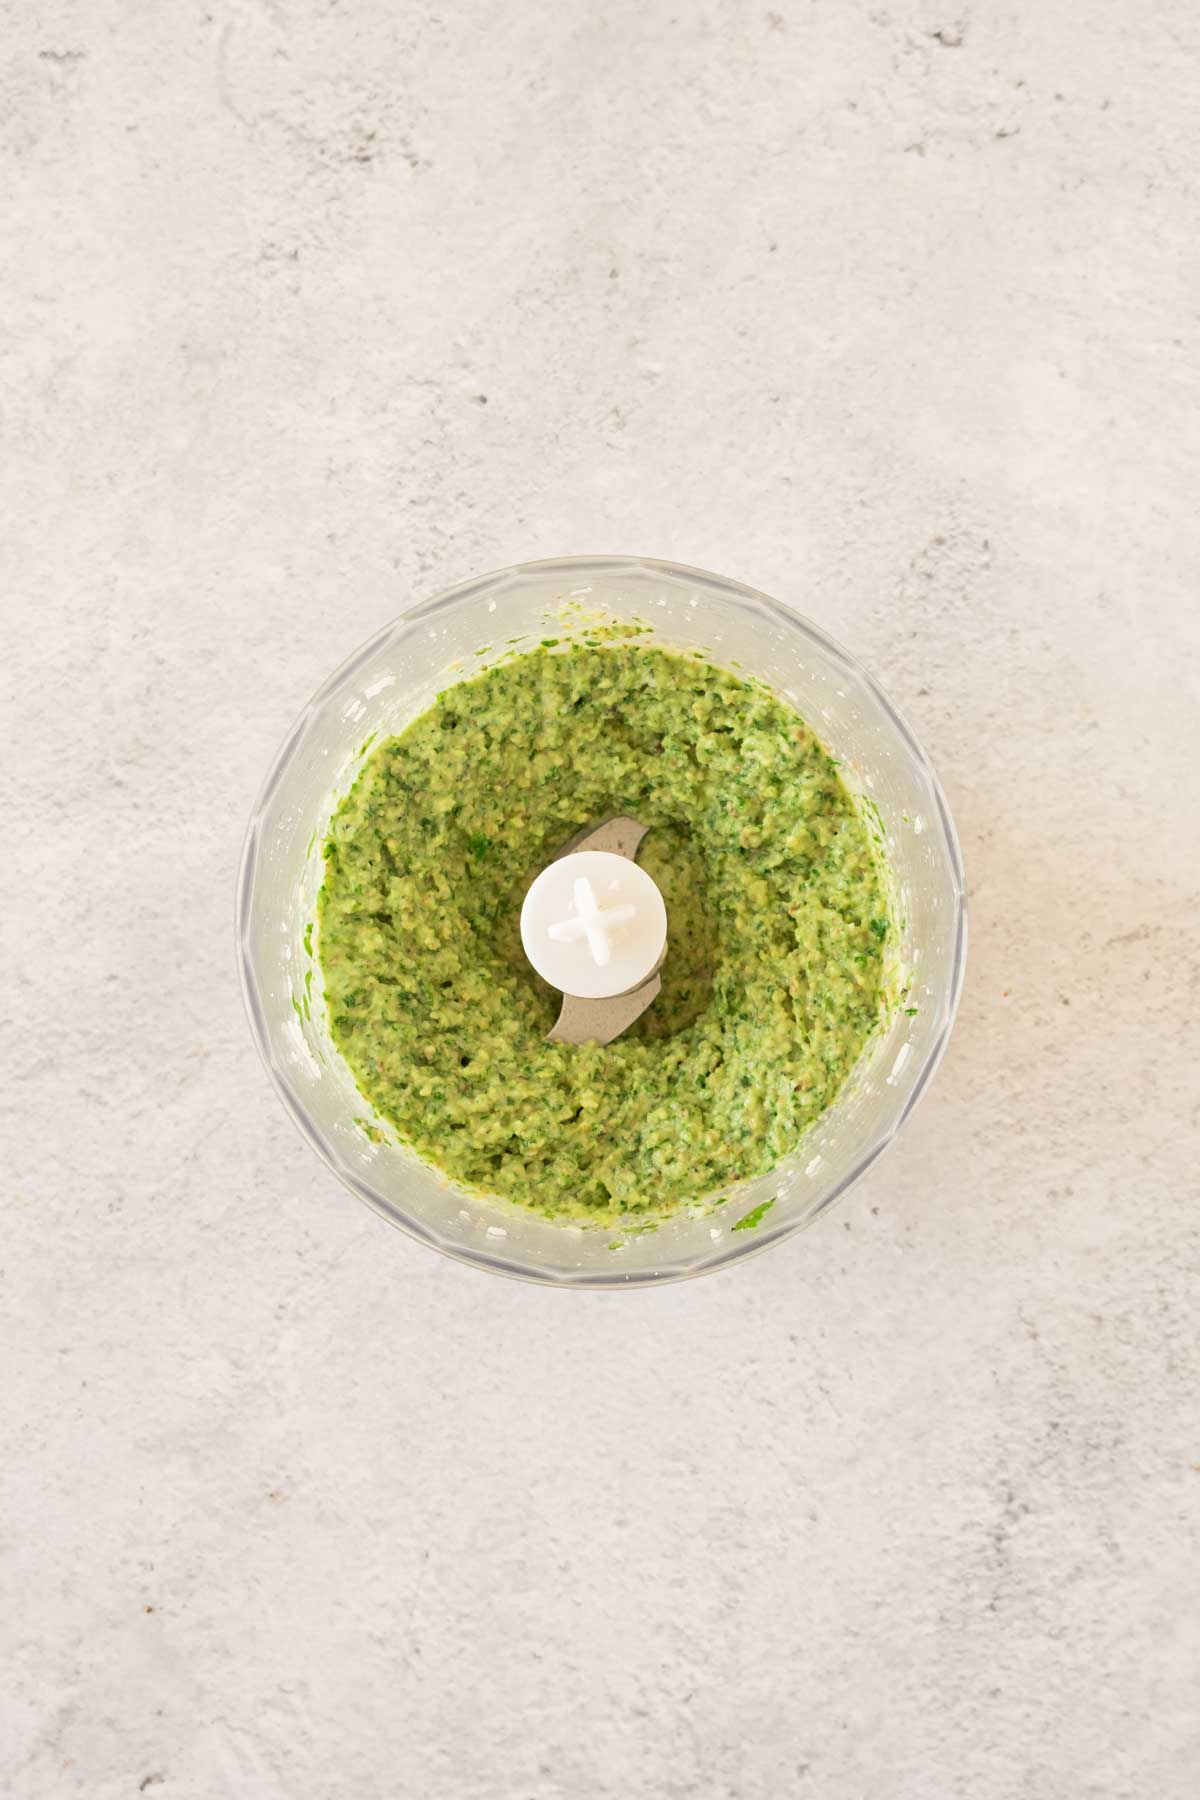 A bowl of green pesto on a white surface.